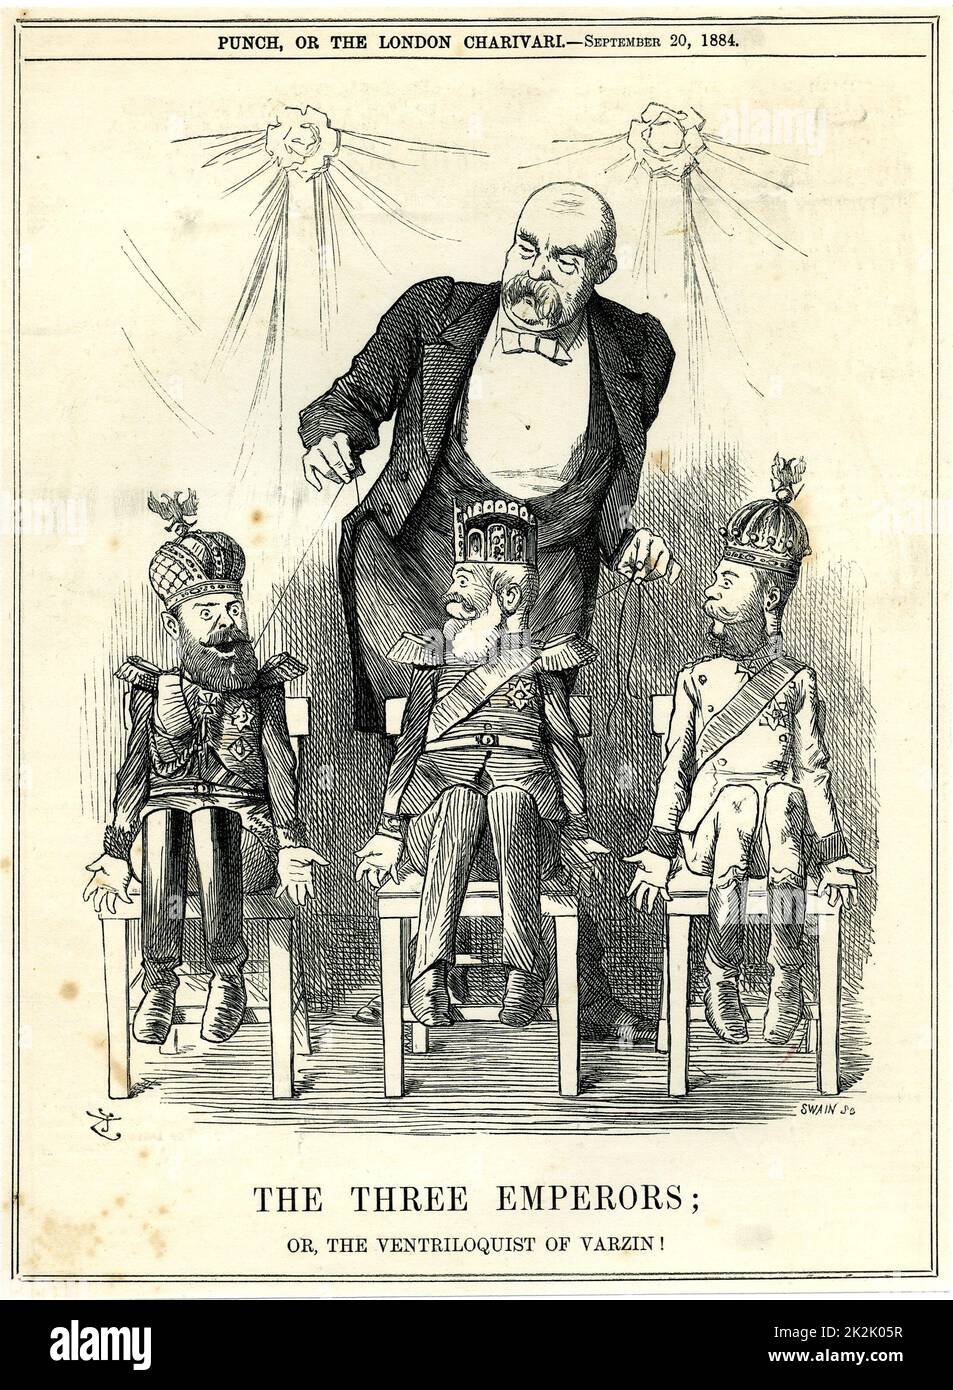 The Three Emperors'. Otto von Bismarck as puppet-master pulling the strings of the emperors of Russia, Germany and Austria.  Varzin or Varzim was Bismarck's country estate. Cartoon by John Tenniel from 'Punch', London, 20 September 1884. Stock Photo